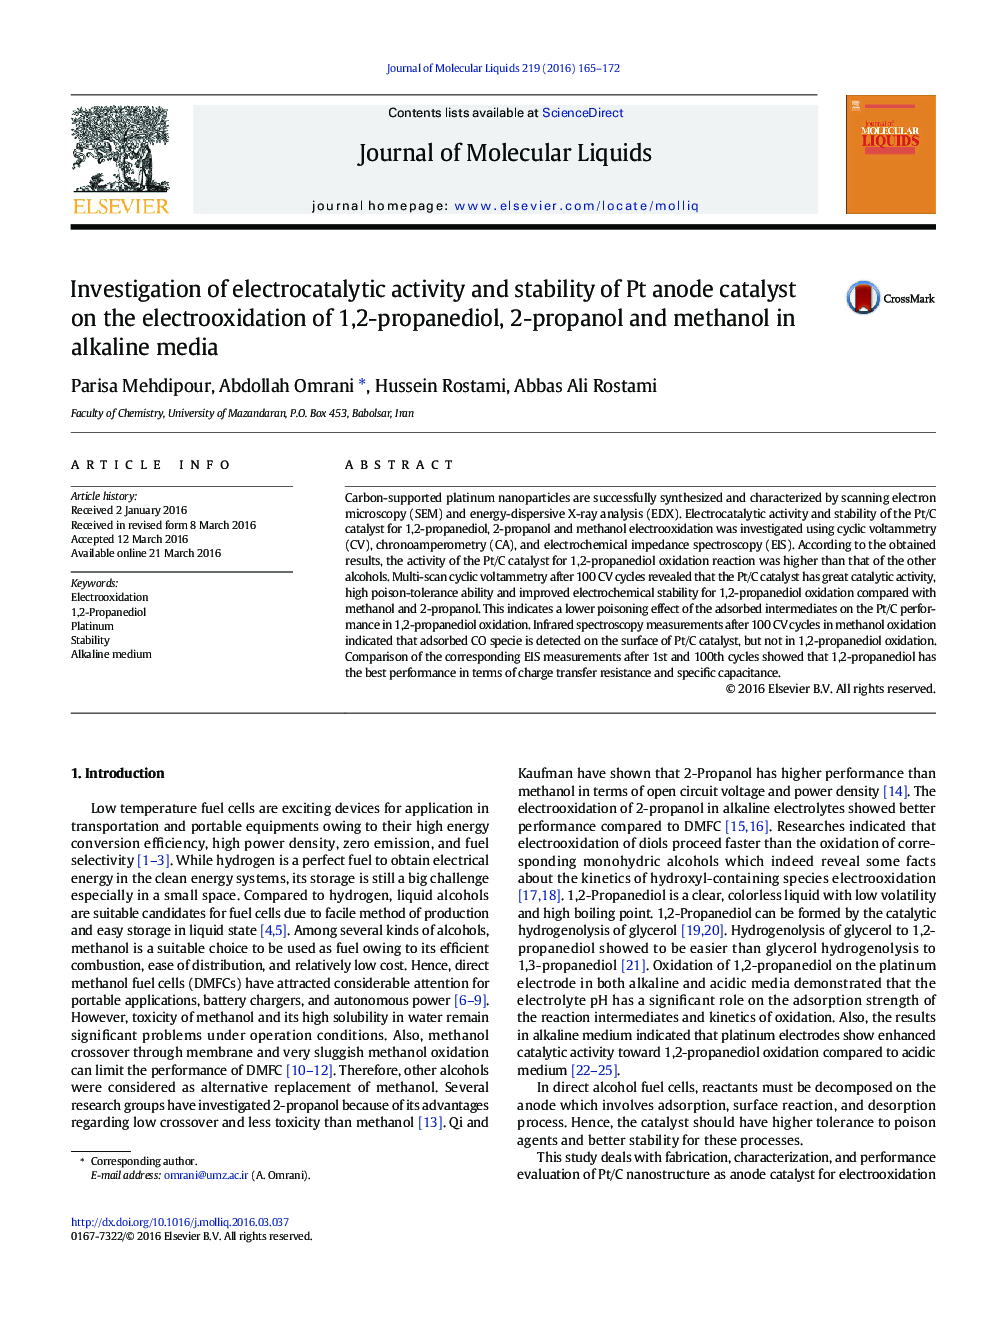 Investigation of electrocatalytic activity and stability of Pt anode catalyst on the electrooxidation of 1,2-propanediol, 2-propanol and methanol in alkaline media